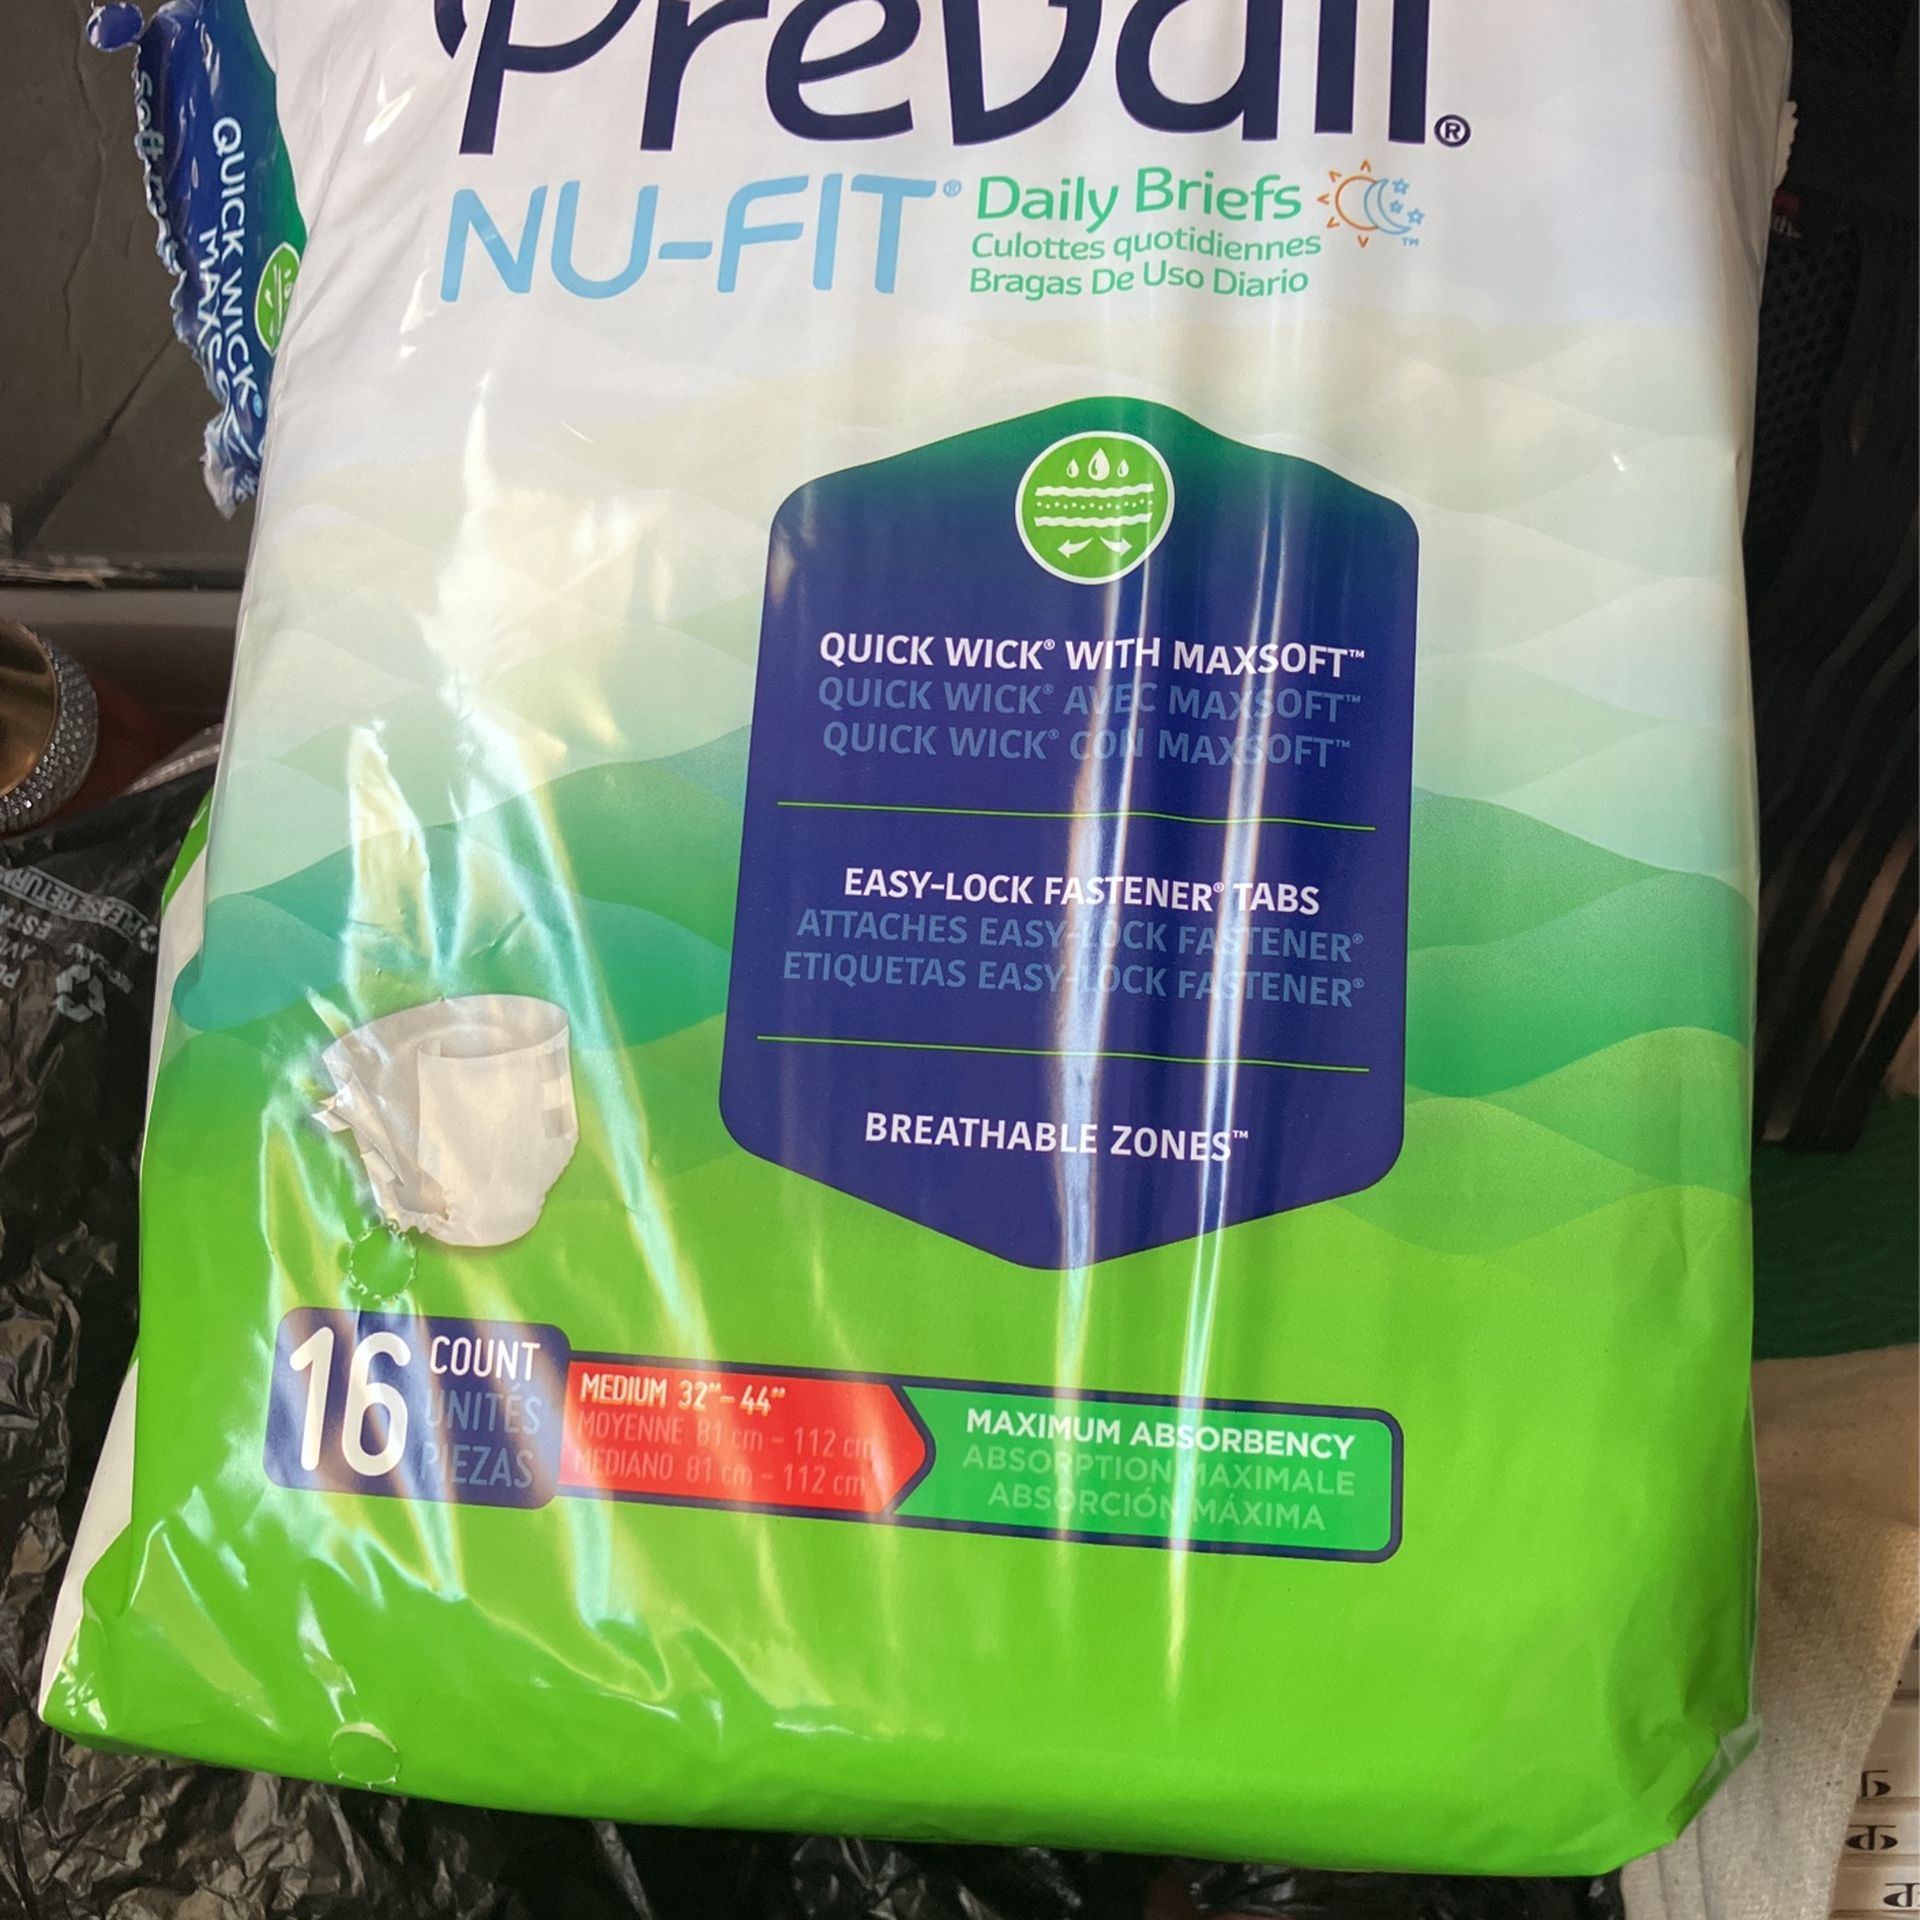 Prevail Nu-Fit six bags of 16